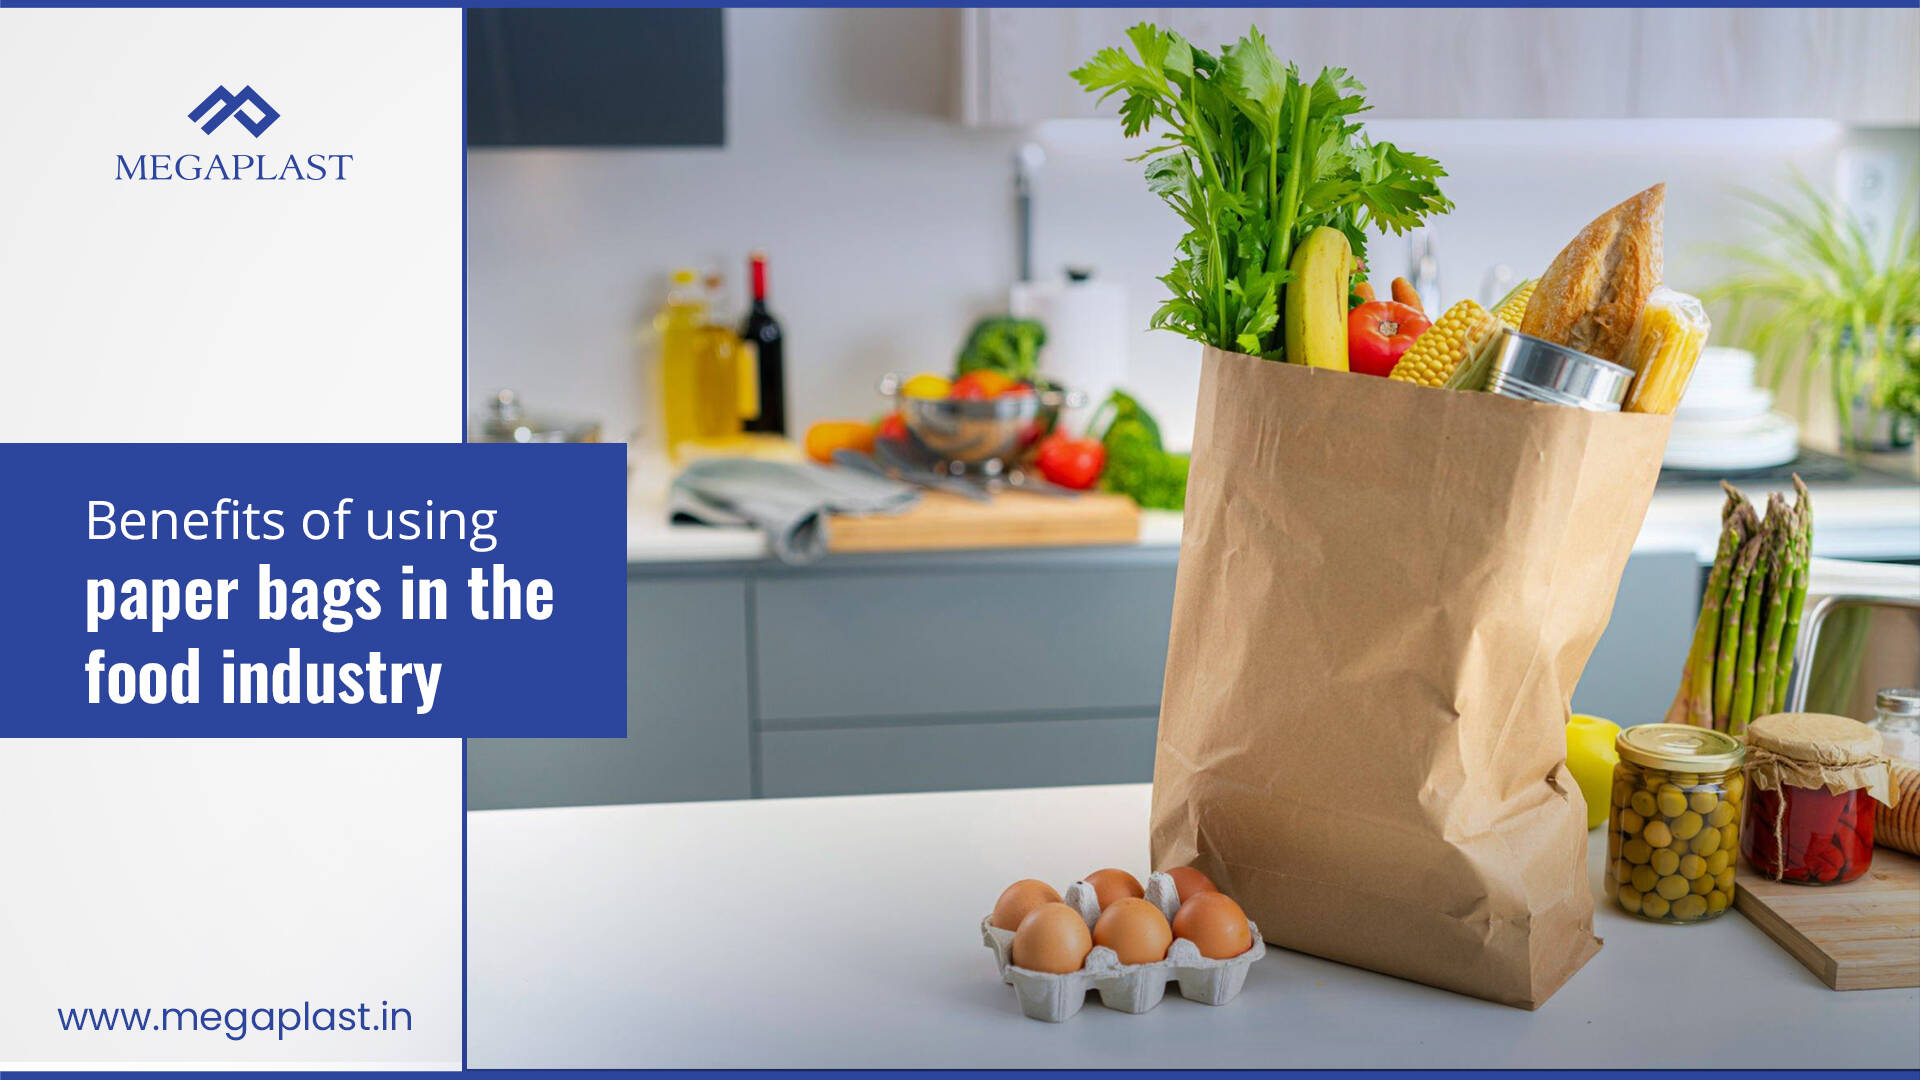 Benefits of using paper bags in the food industry